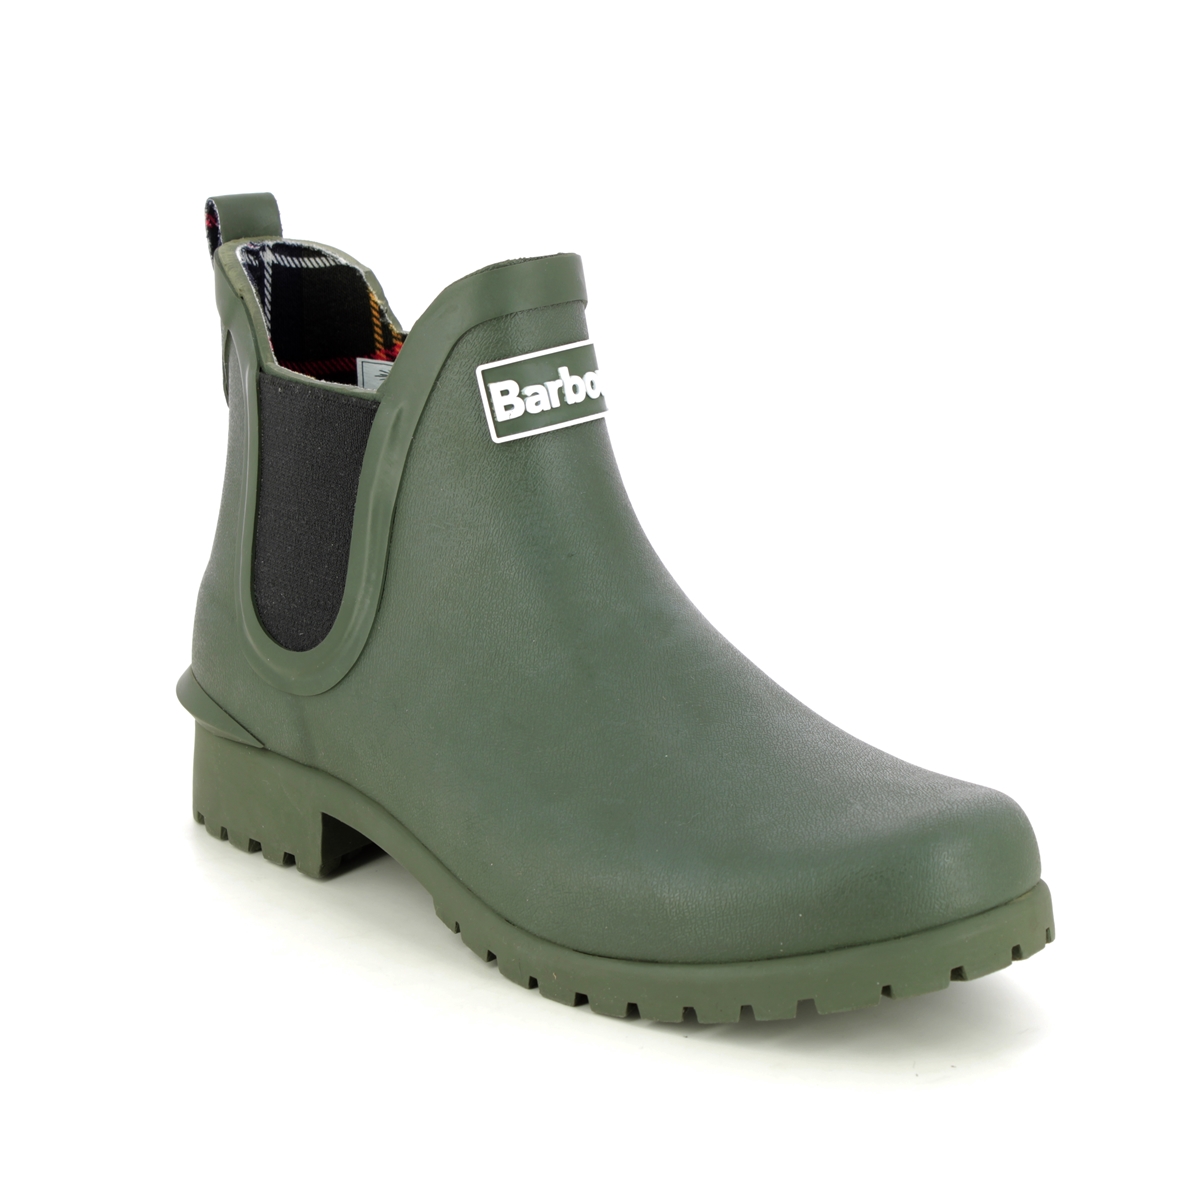 Barbour Wilton Wellie Olive Green Boots Lrf0066-Ol11 In Size 7 In Plain Olive Green